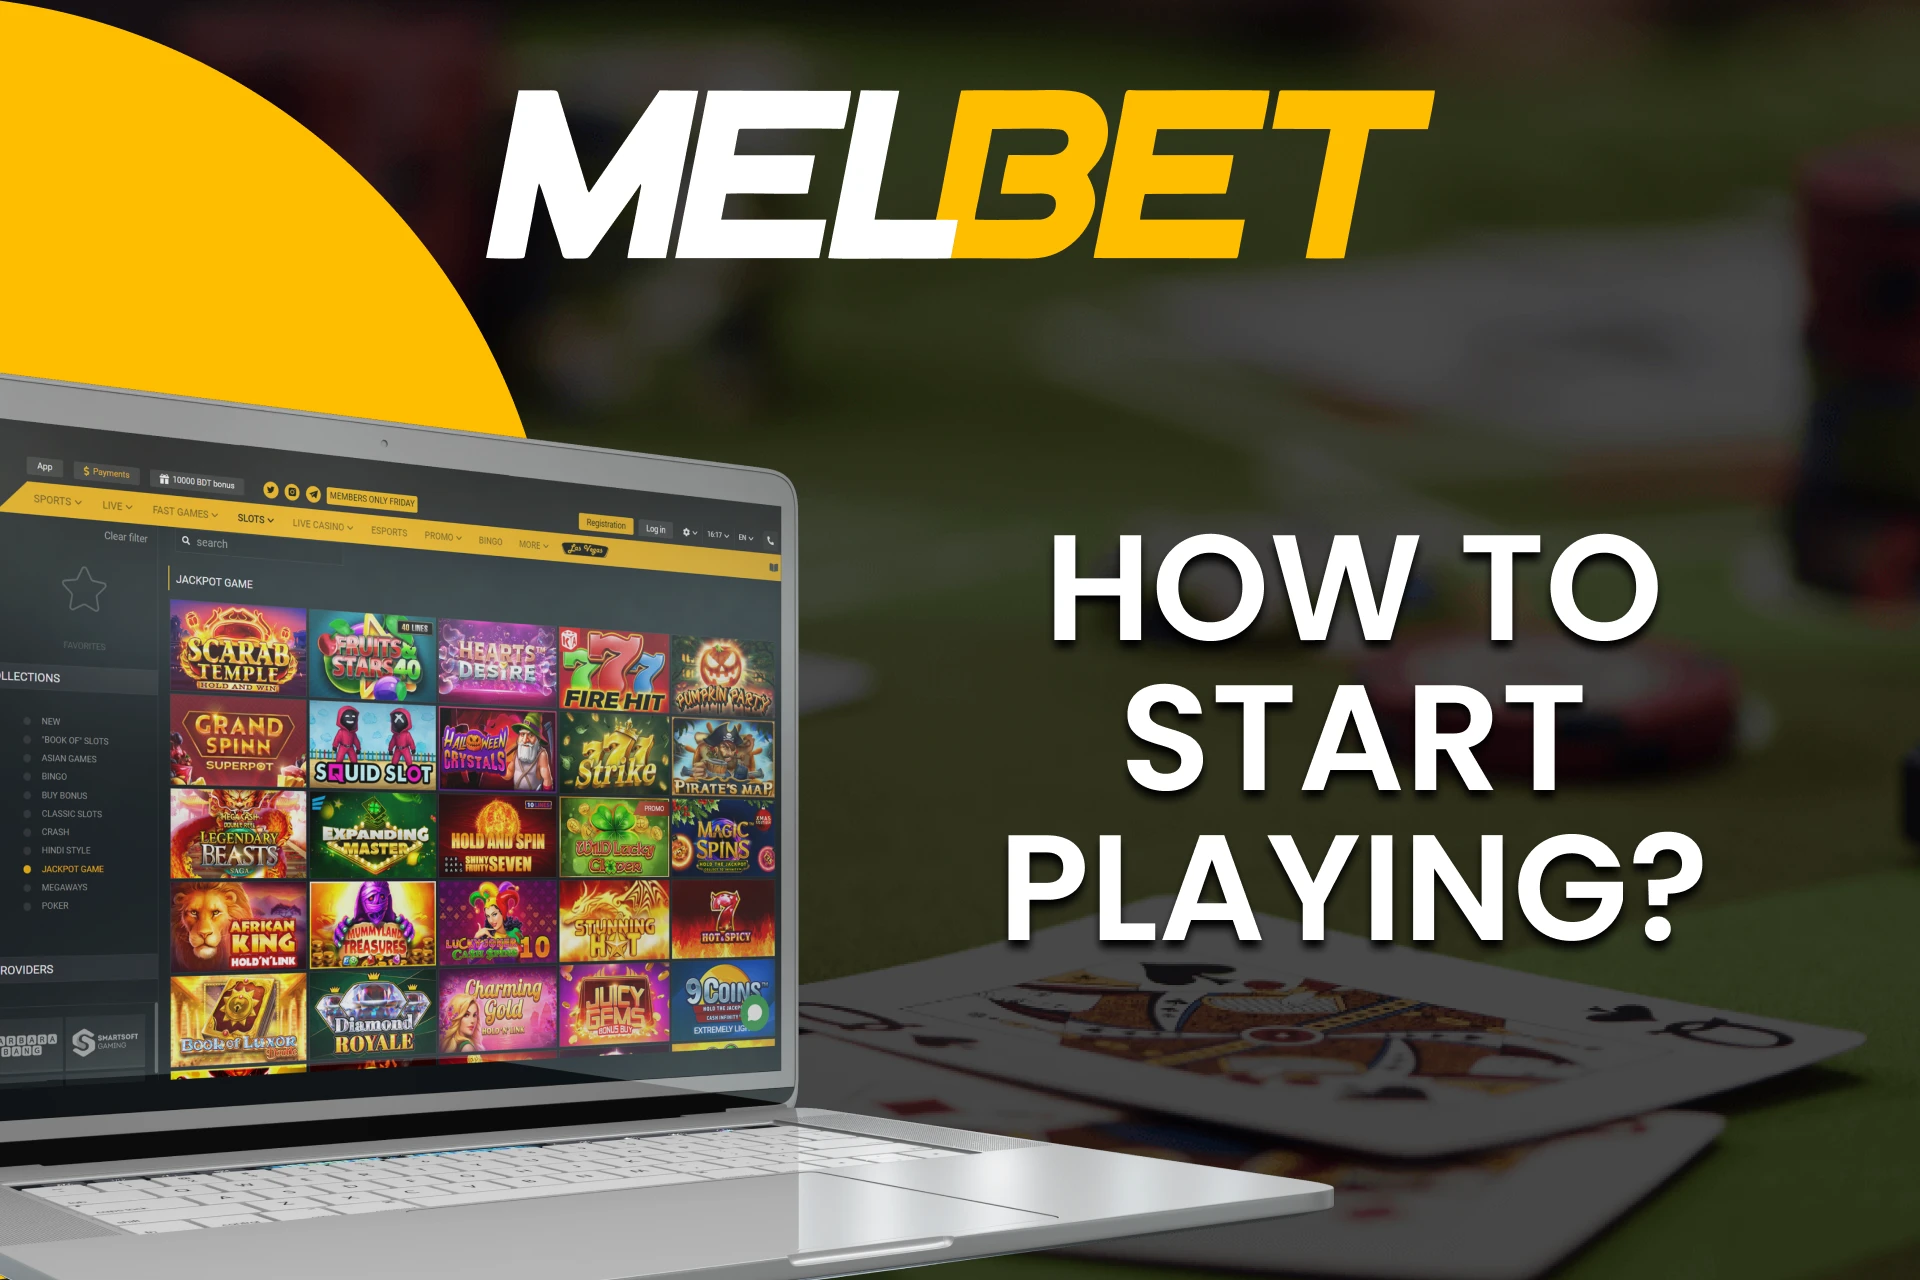 Go to the appropriate Melbet section to play Jackpot.